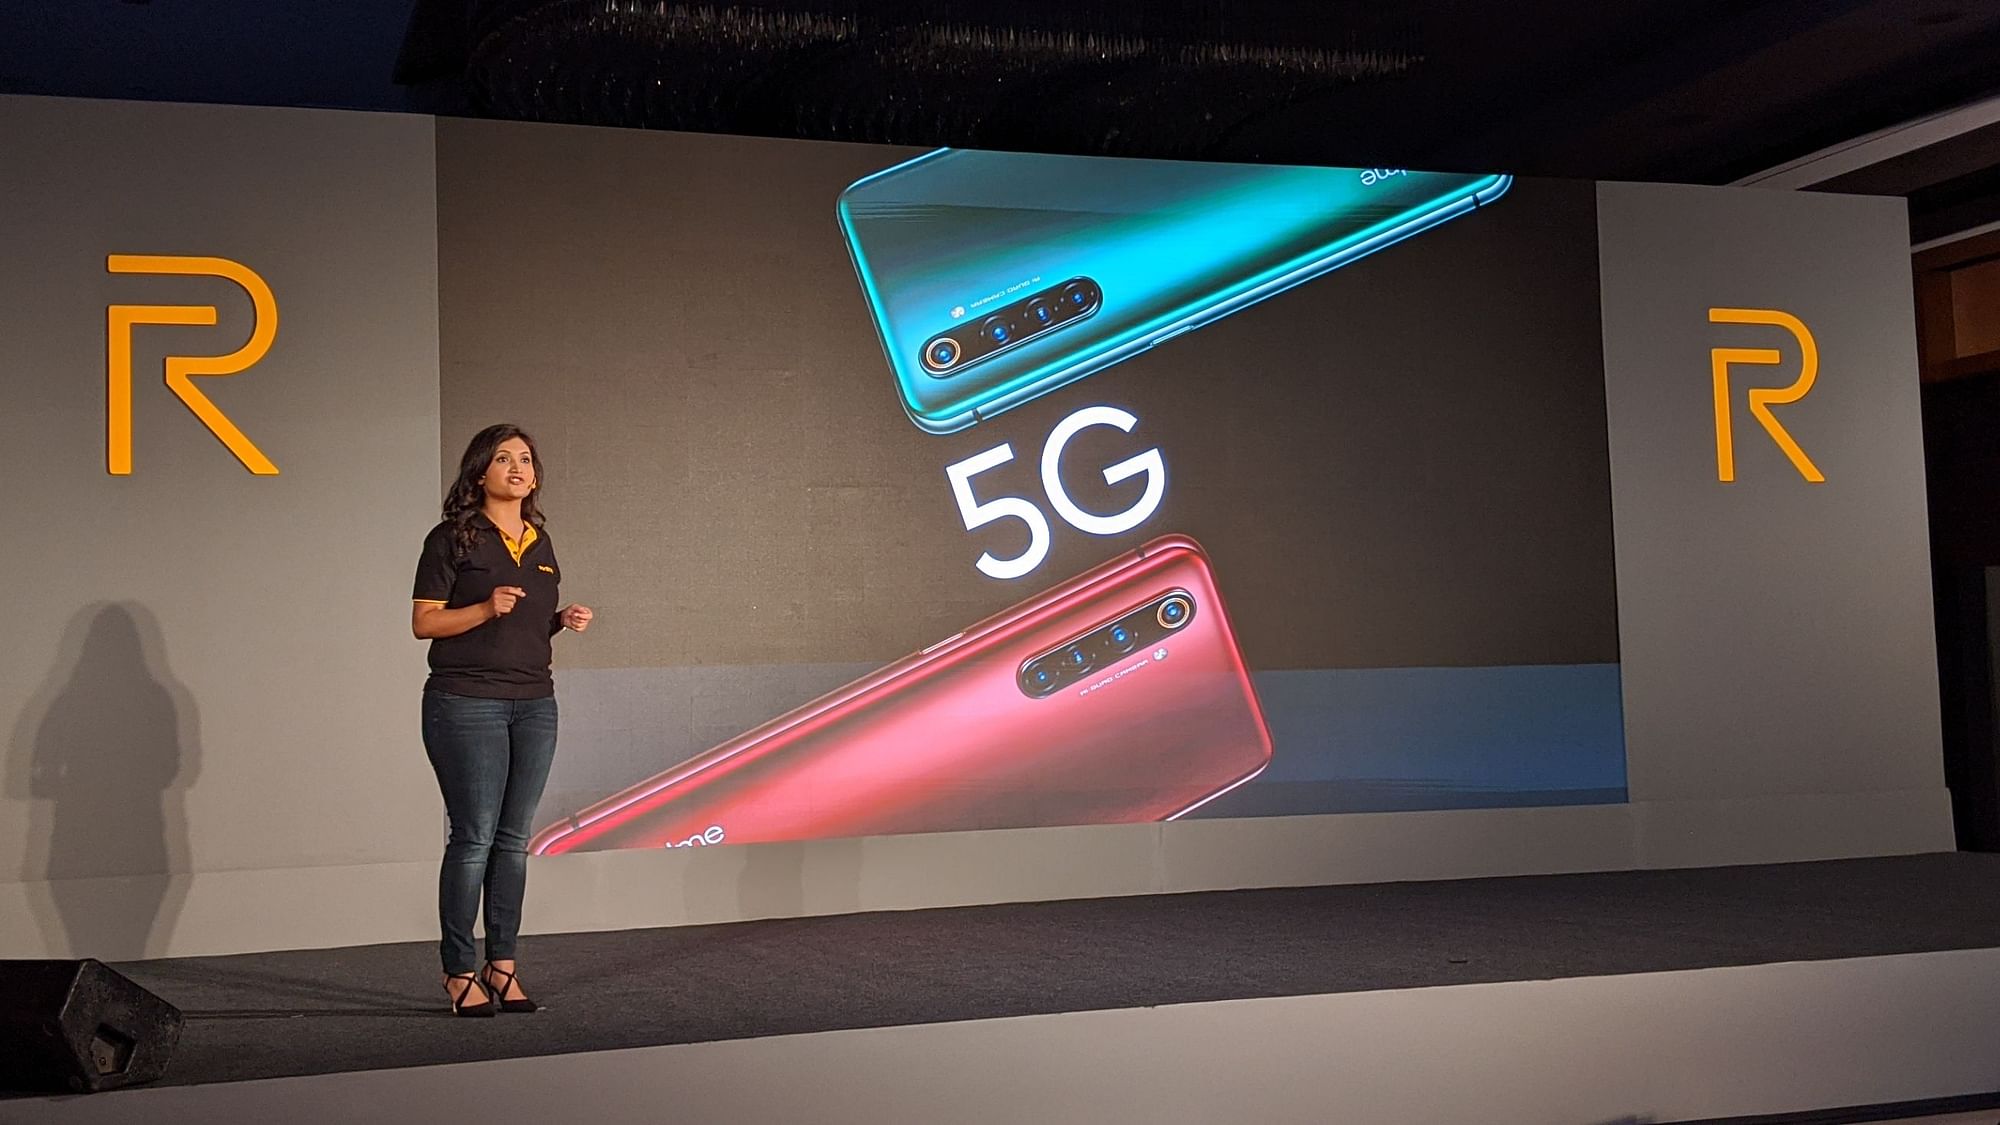 5G network is yet to make its official debut in India, so what’s the point of having phones?